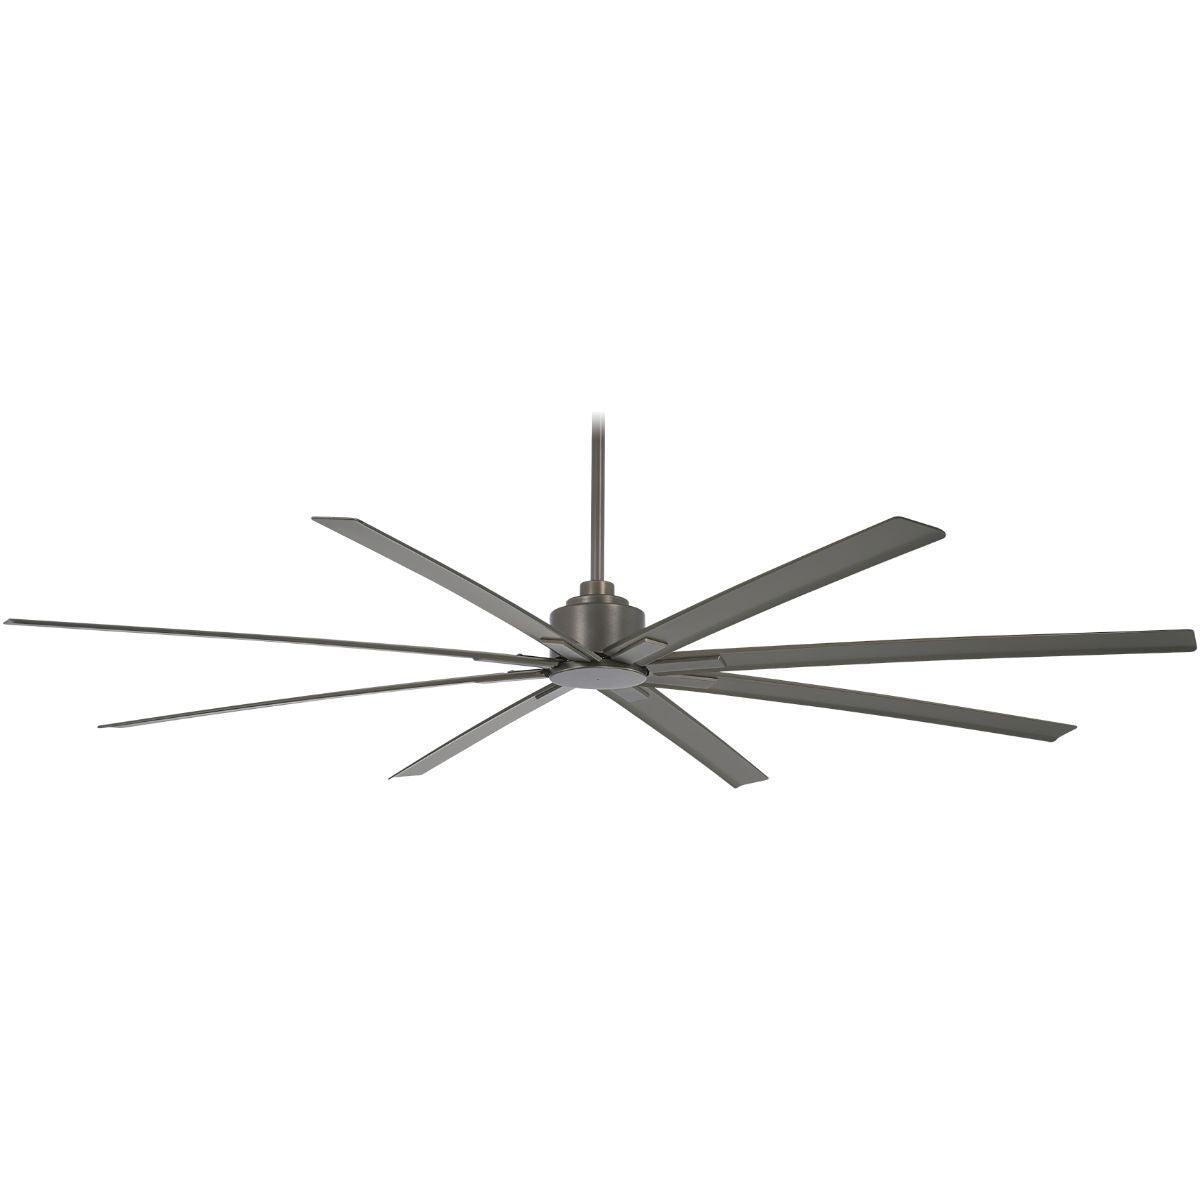 Xtreme H2O 84 Inch Windmill Outdoor Ceiling Fan With Remote - Bees Lighting